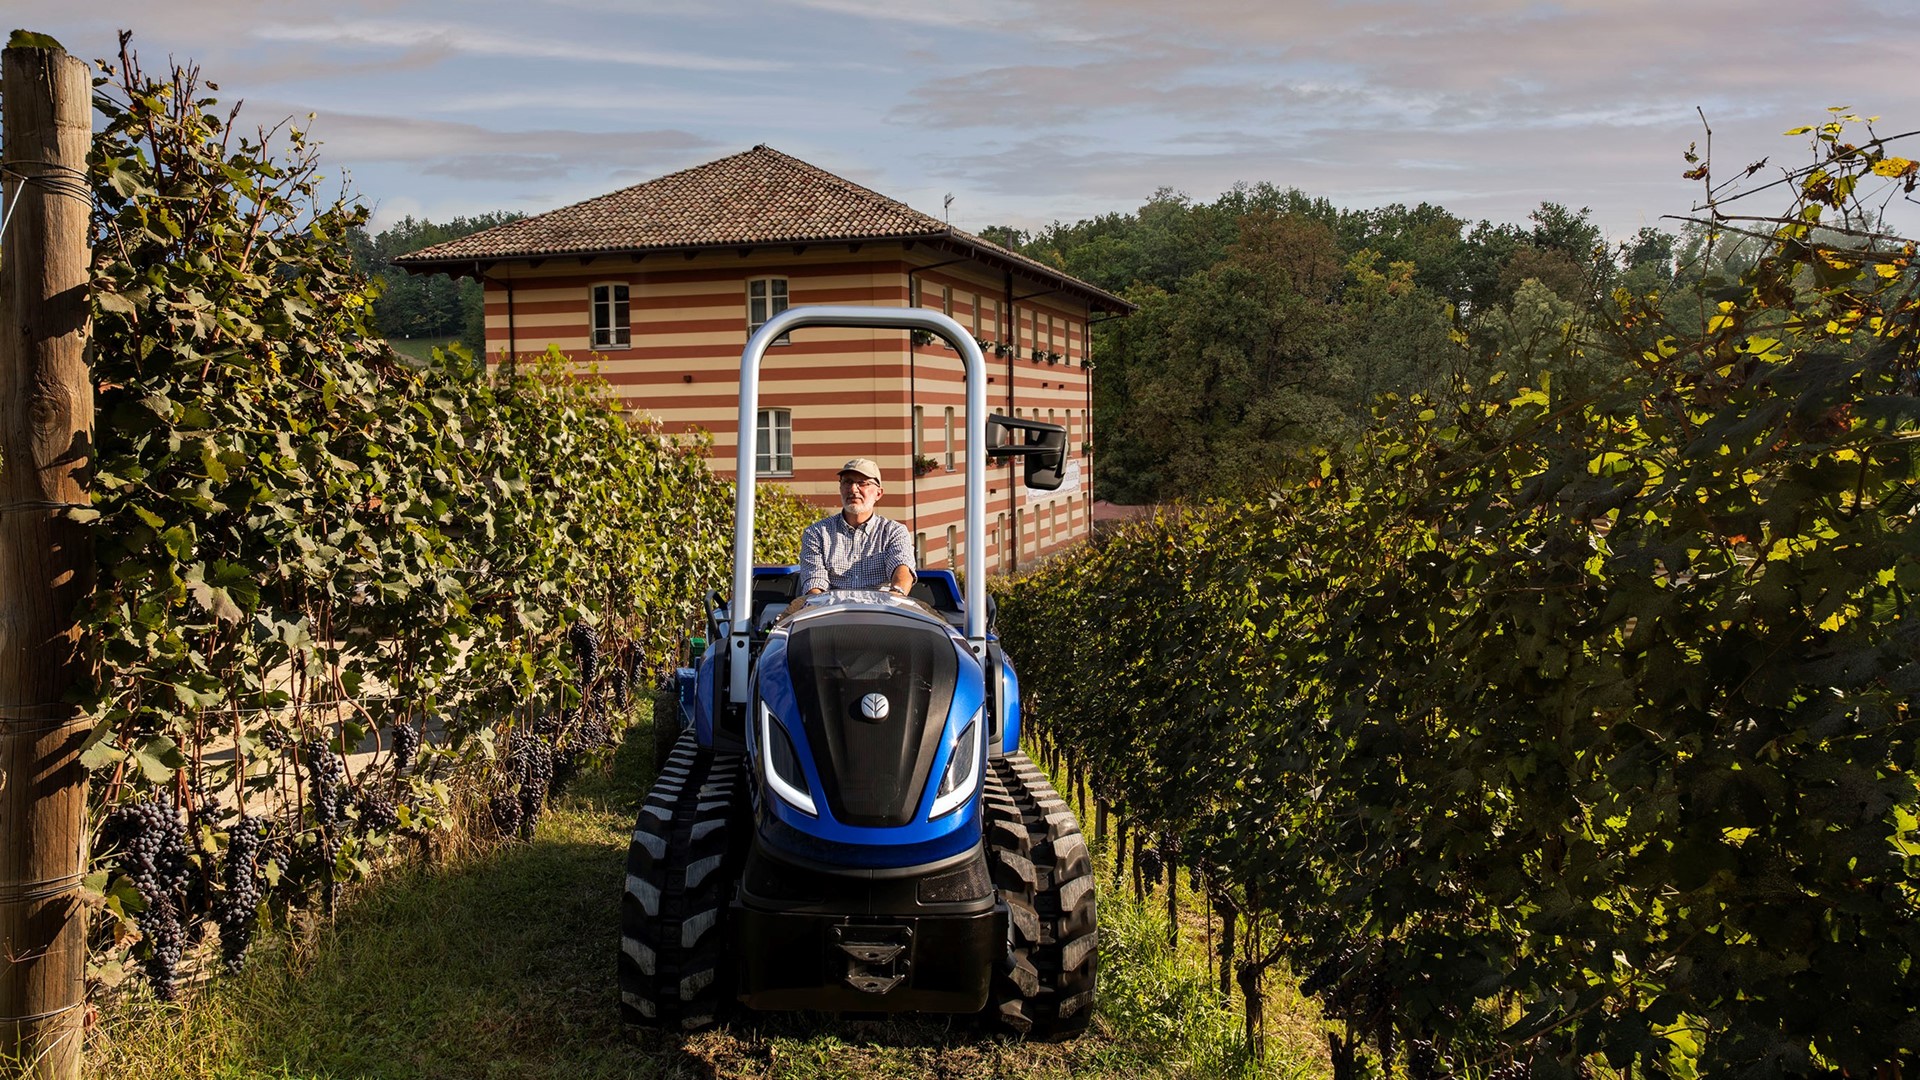 FPT INDUSTRIAL AND FONTANAFREDDA JOIN FORCES FOR THE WORLD’S FIRST ZERO EMISSIONS BAROLO WINE VINTAGE